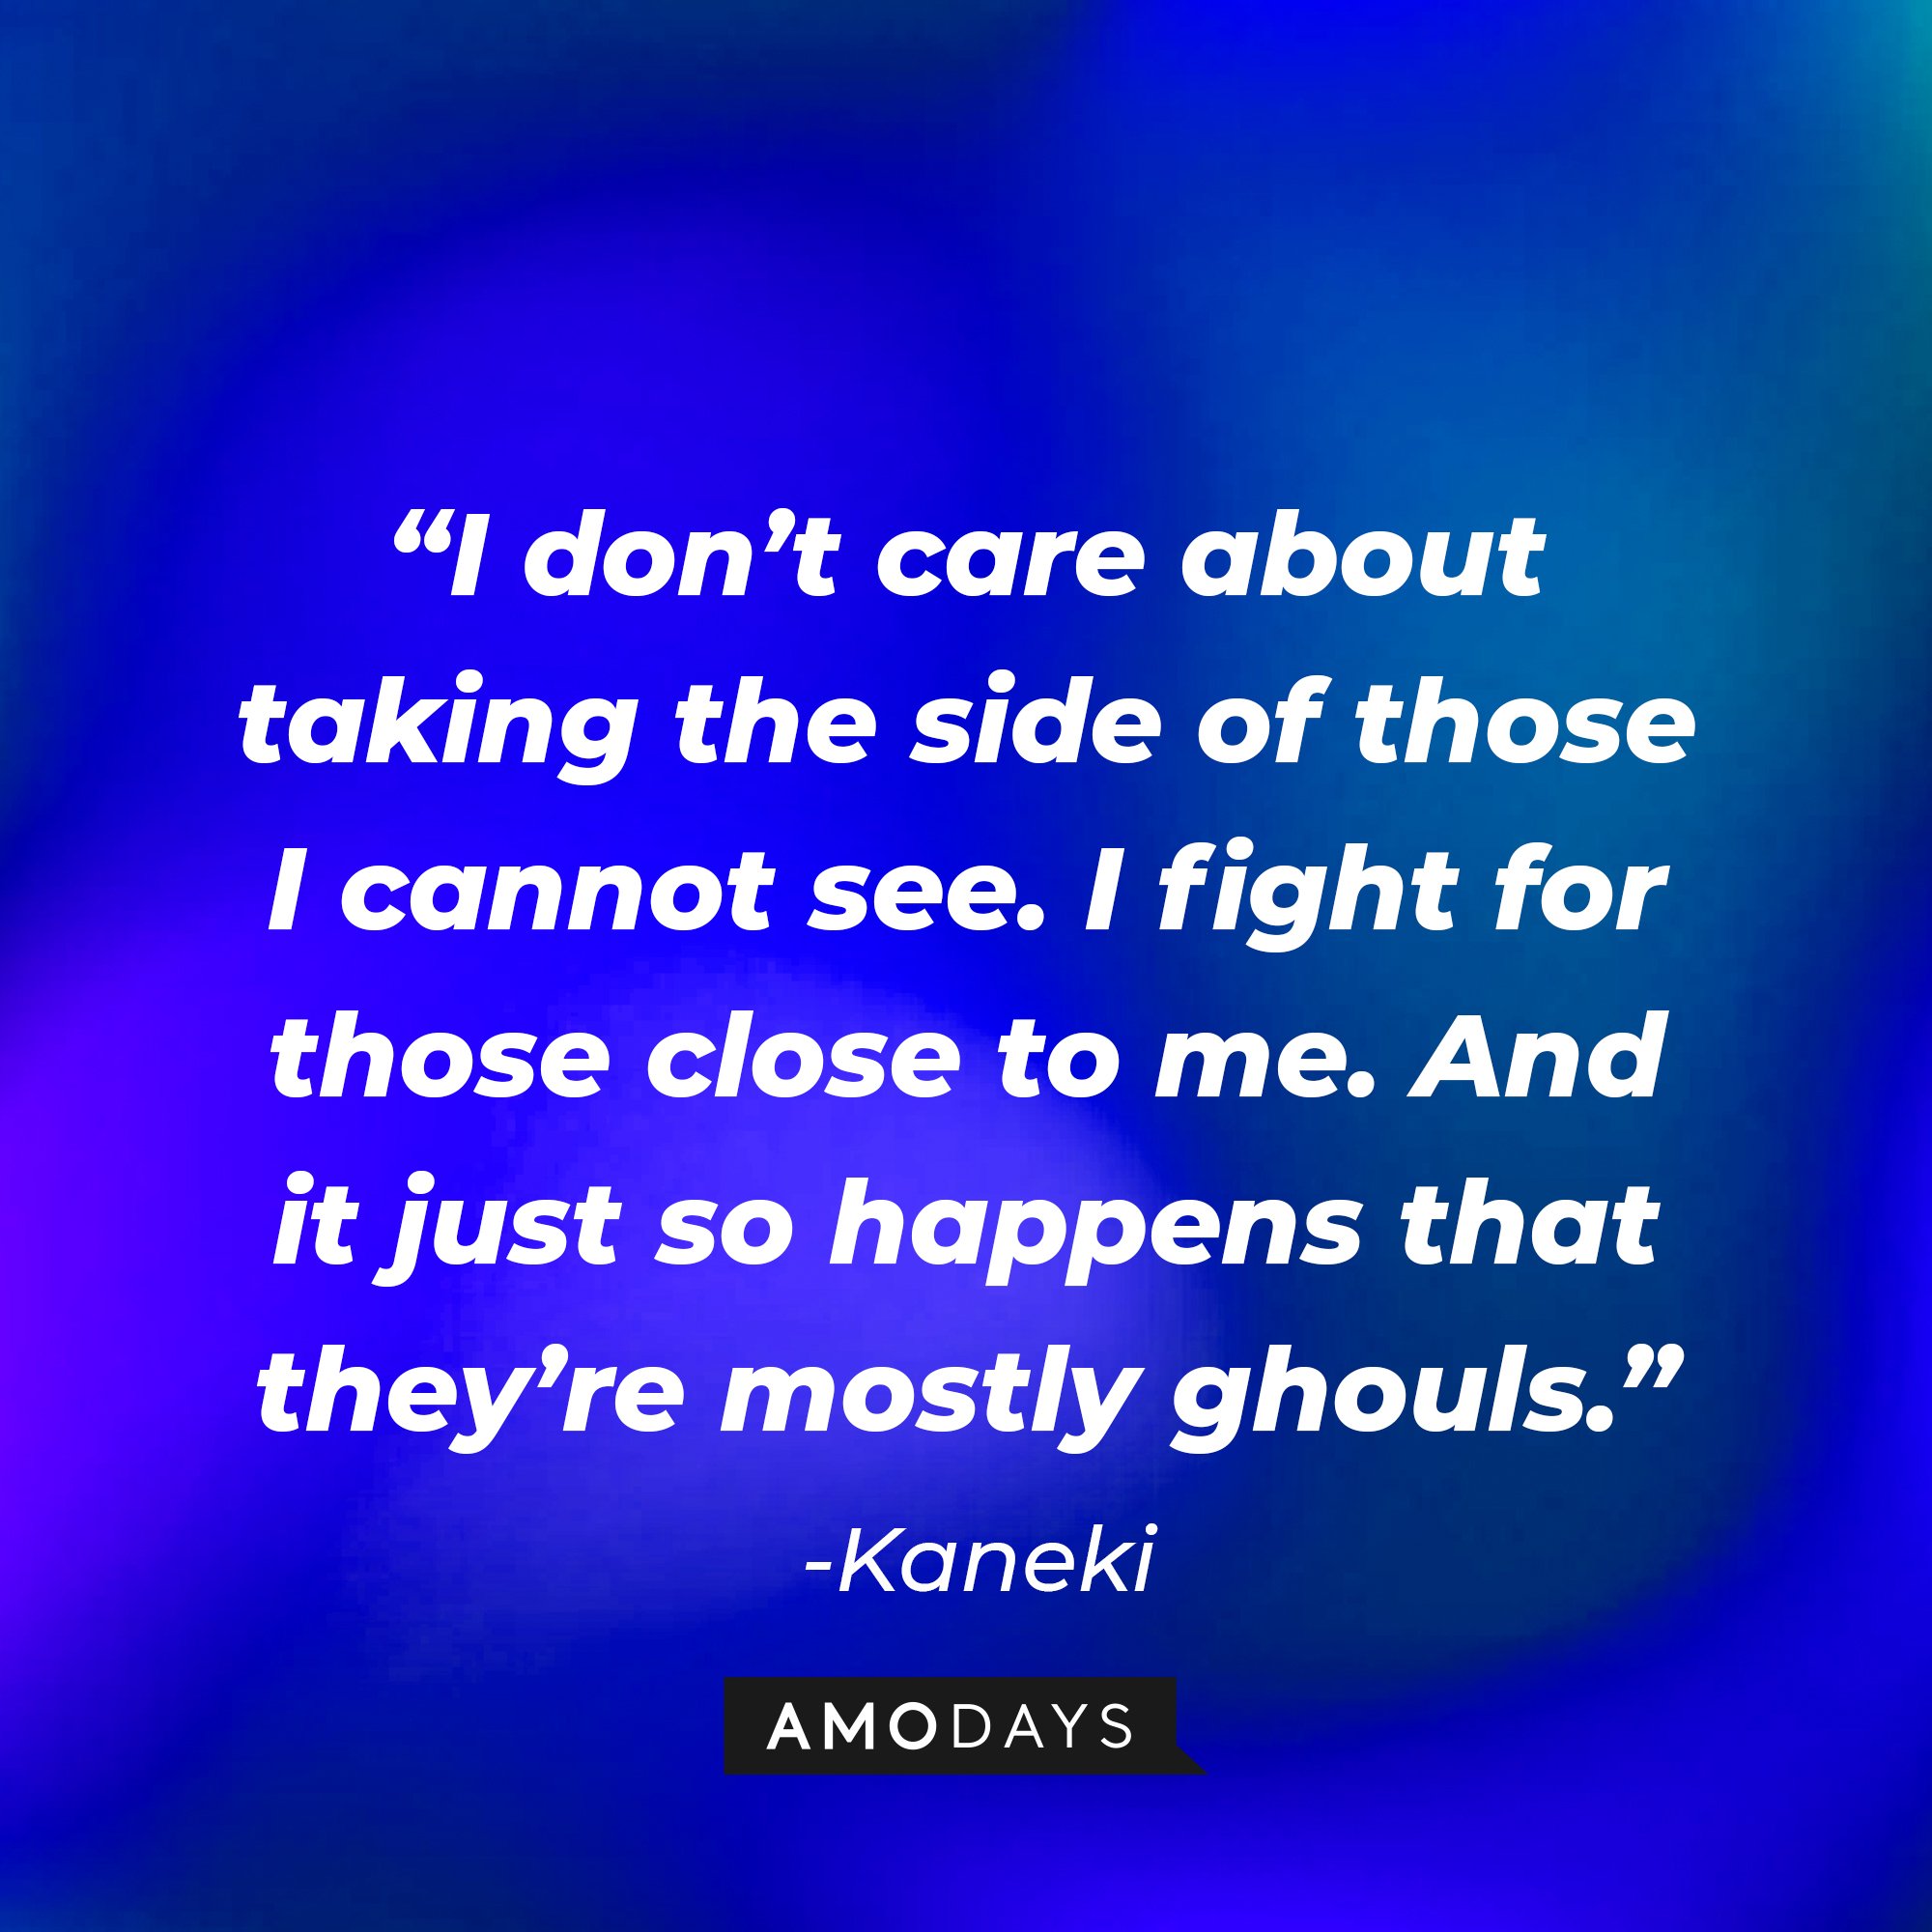 Kaneki's quote: “I don’t care about taking the side of those I cannot see. I fight for those close to me. And it just so happens that they’re mostly ghouls.” | Image: AmoDays